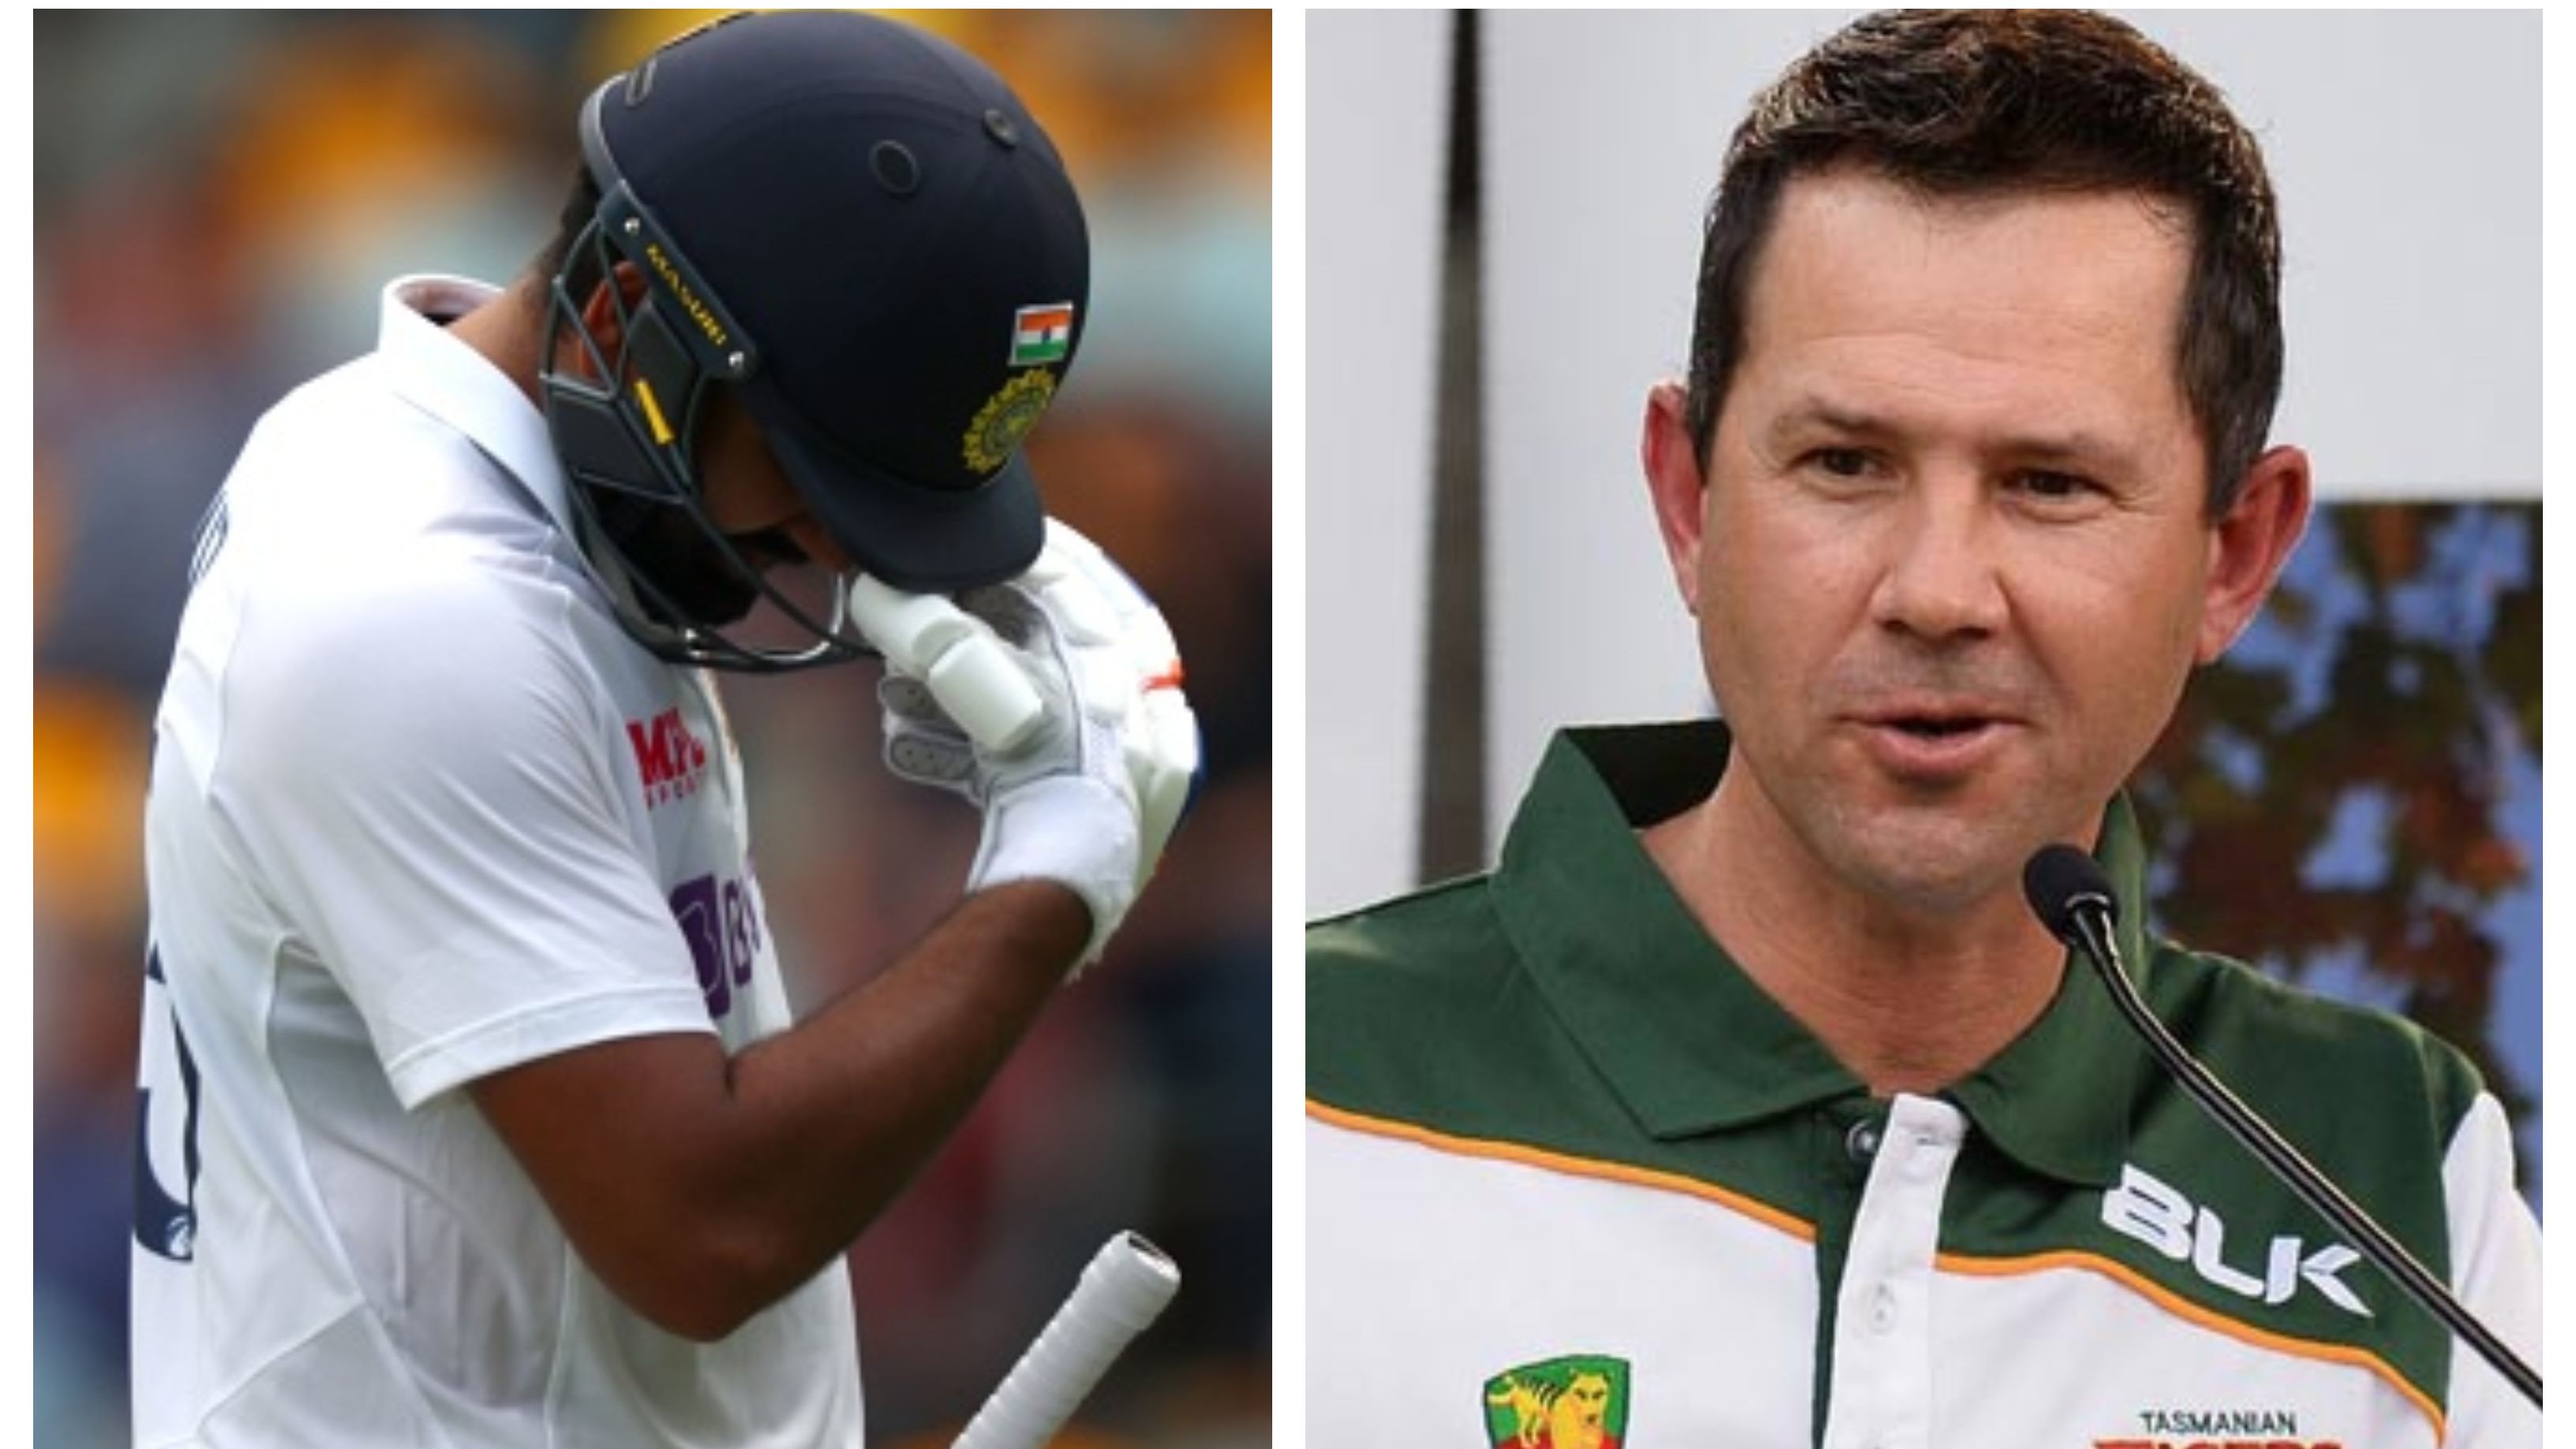 AUS v IND 2020-21: “You've got to be better than that”, Ponting slams Rohit for gifting his wicket away in Brisbane